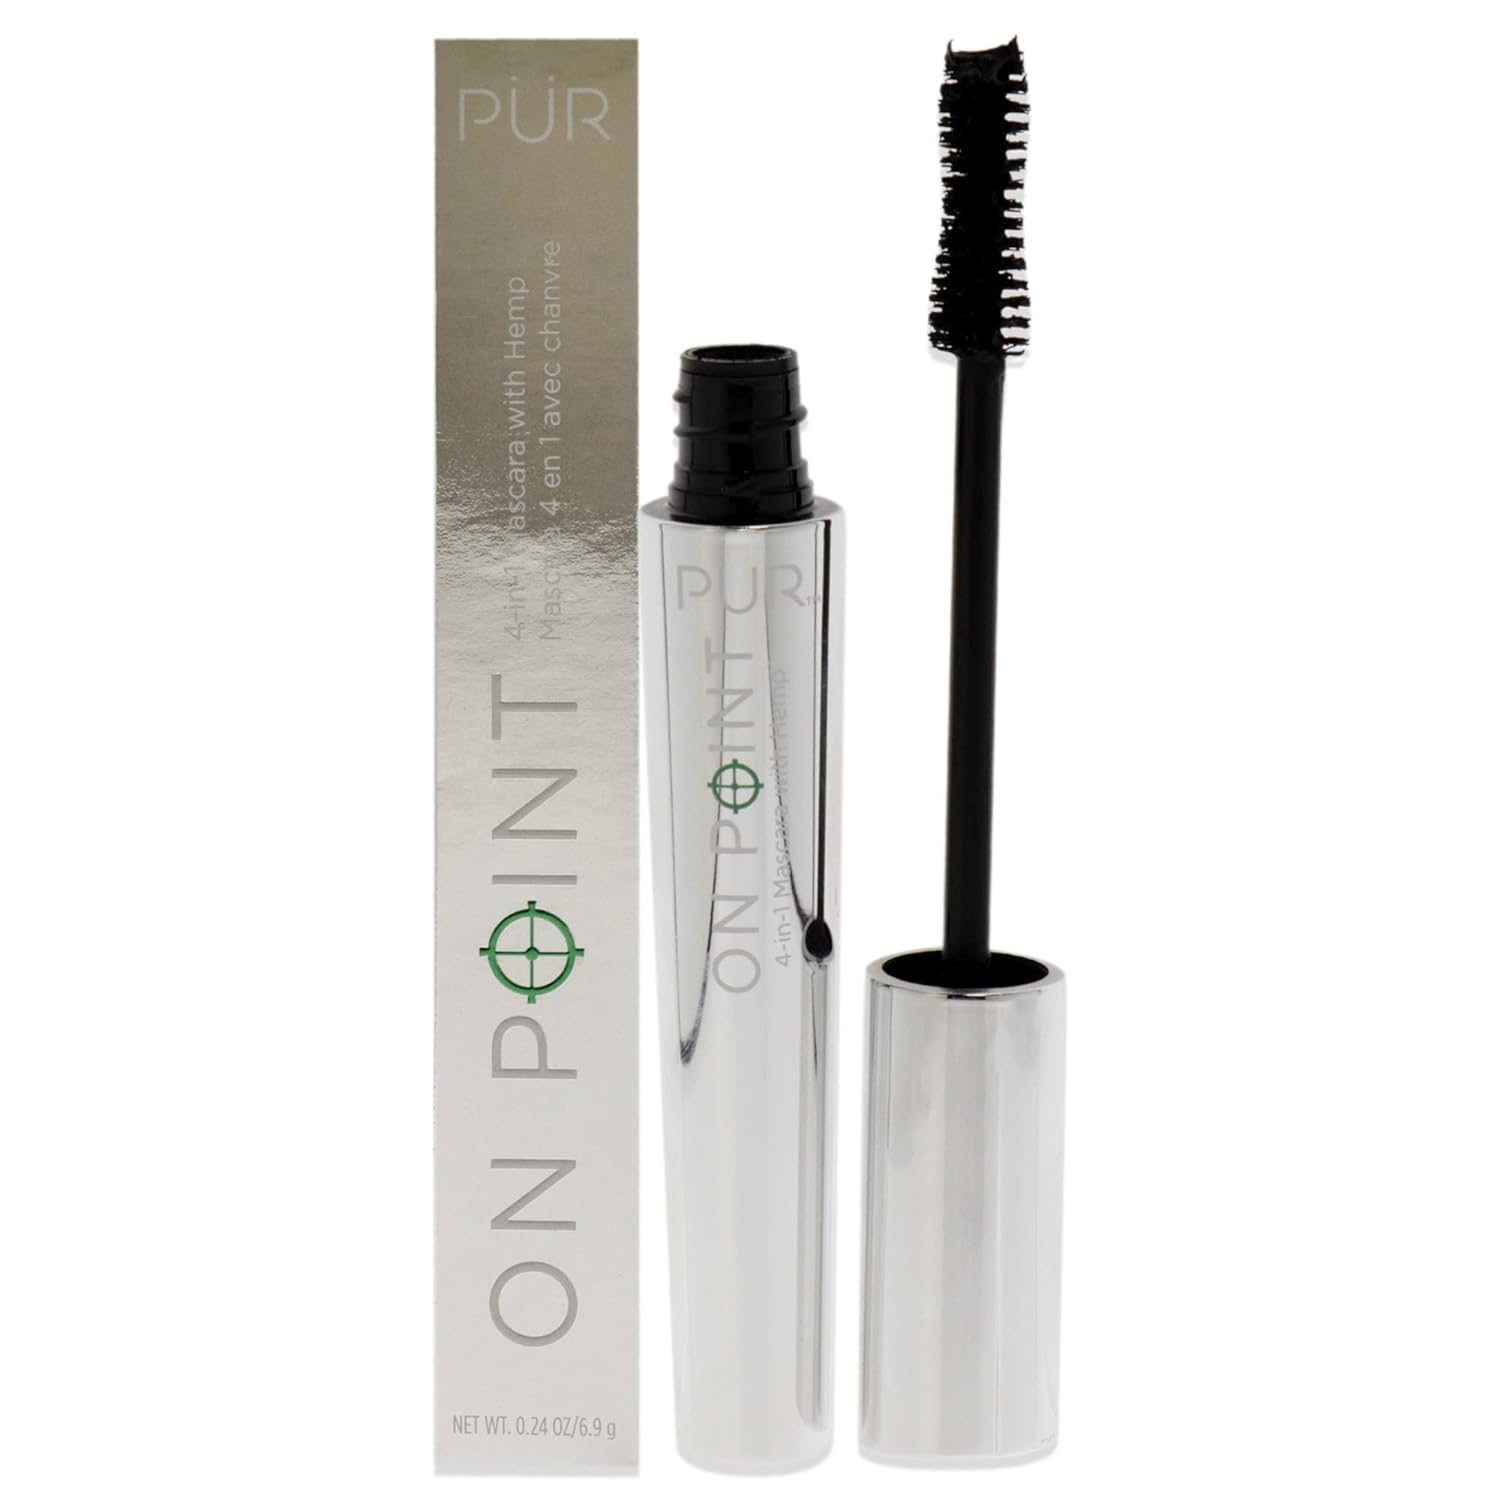 Pur Minerals On Point Mascara with Hemp.